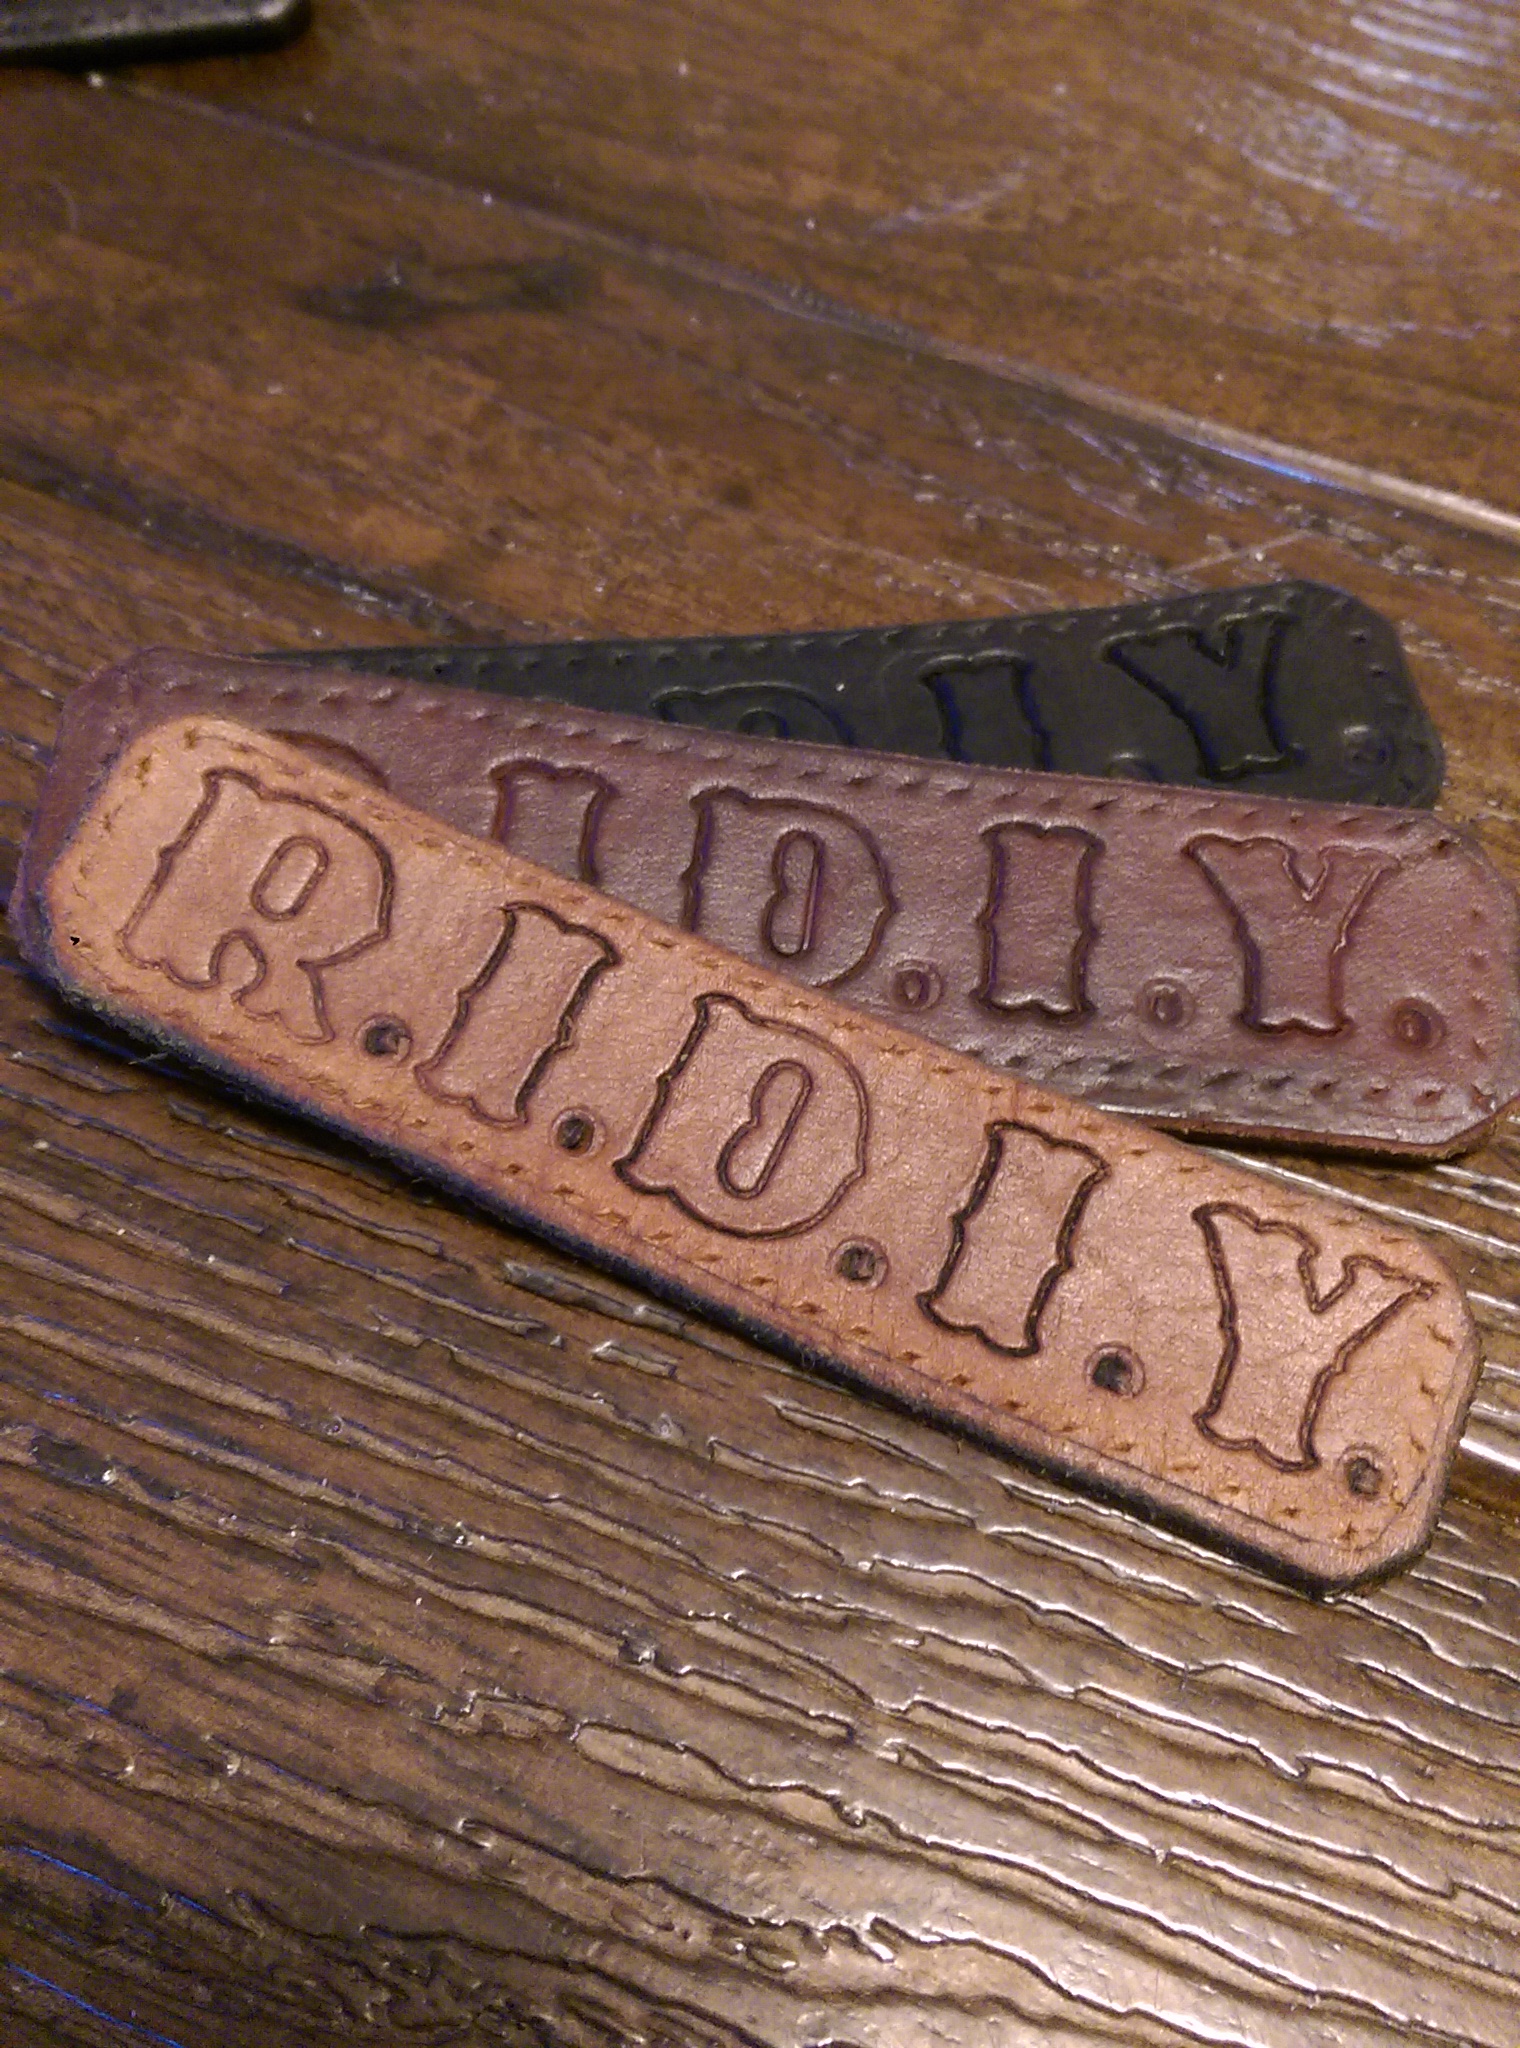 Custom R.I.D.I.Y. Leather Patches